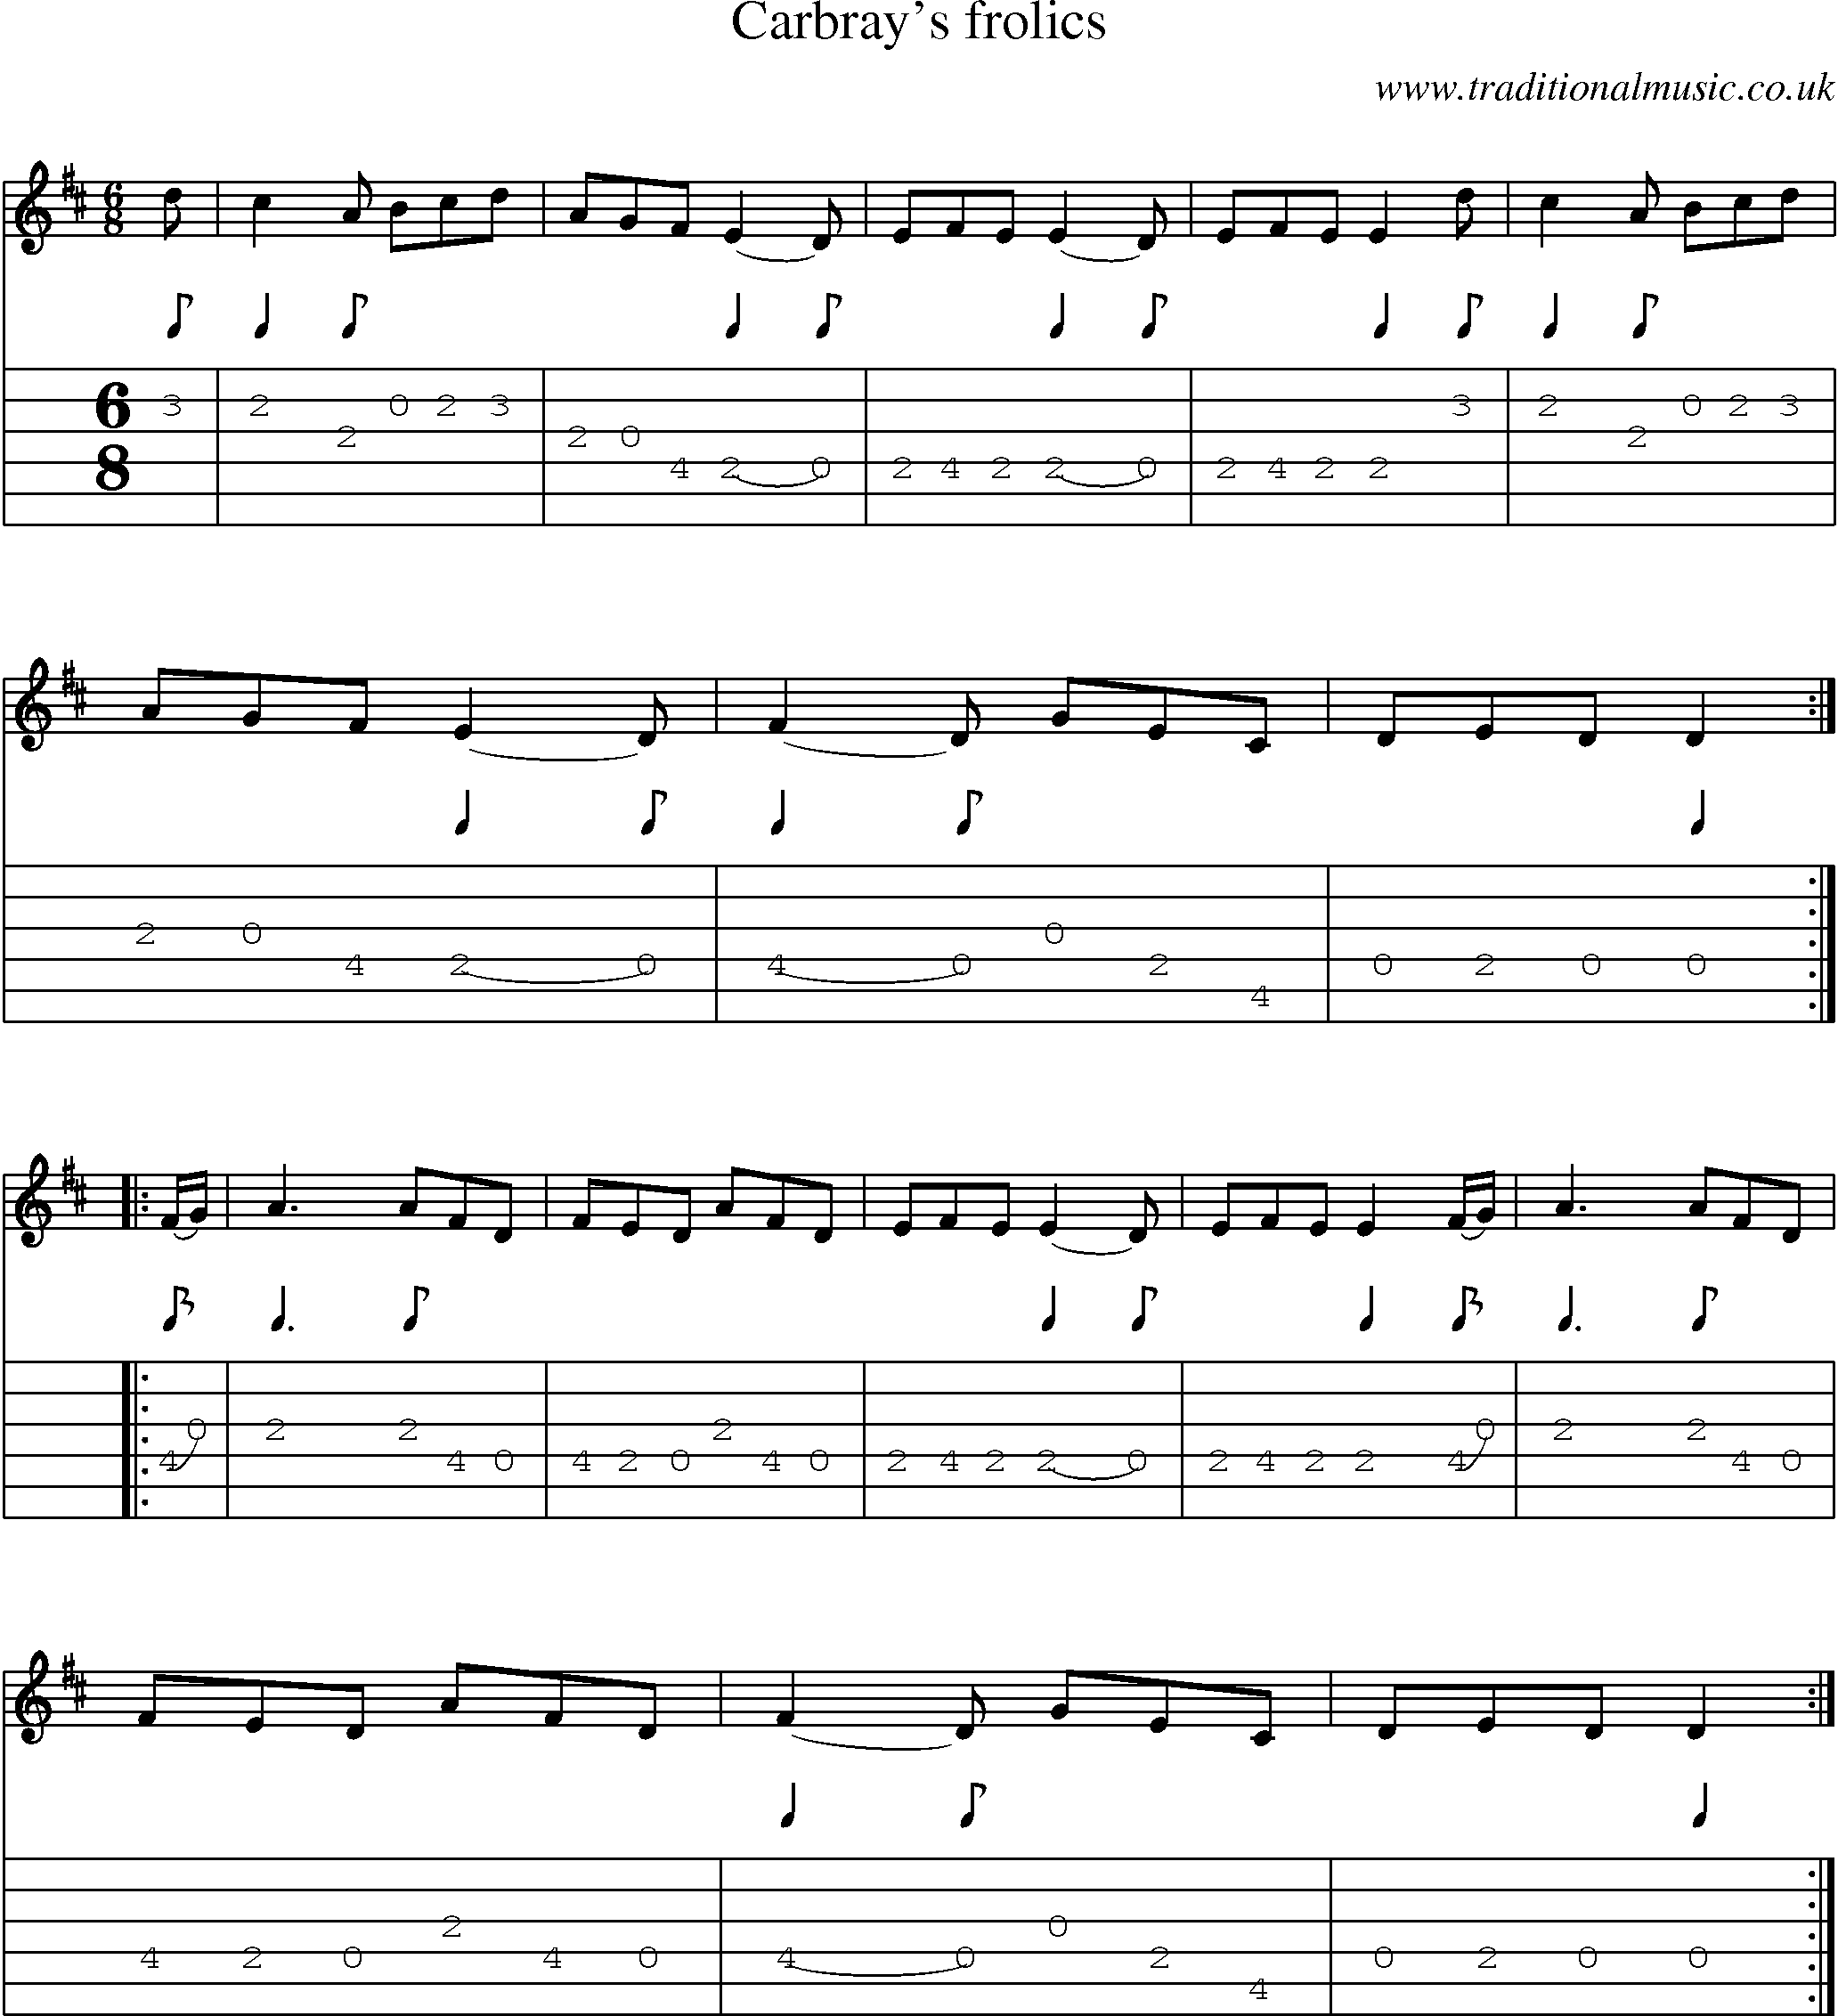 Music Score and Guitar Tabs for Carbrays Frolics